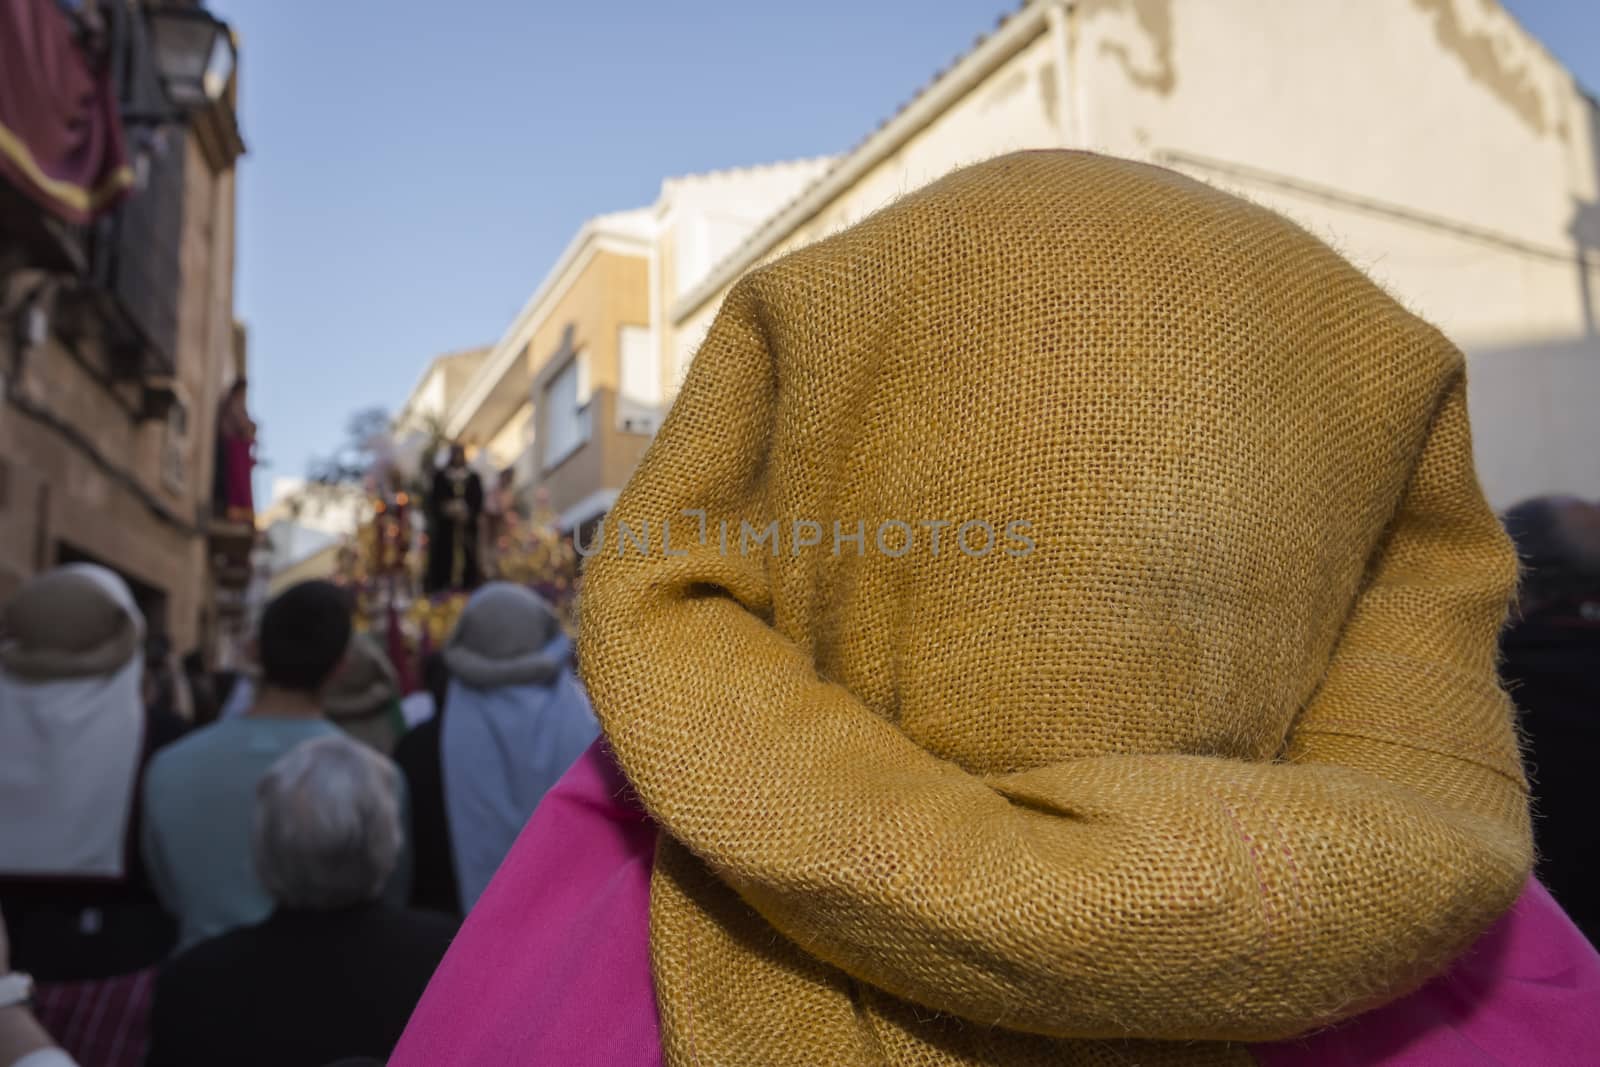 Linares, Jaen province, SPAIN - March 17, 2014: Group of costaleros during a procession of holy week, taken in Linares, Jaen province, Andalusia, Spain